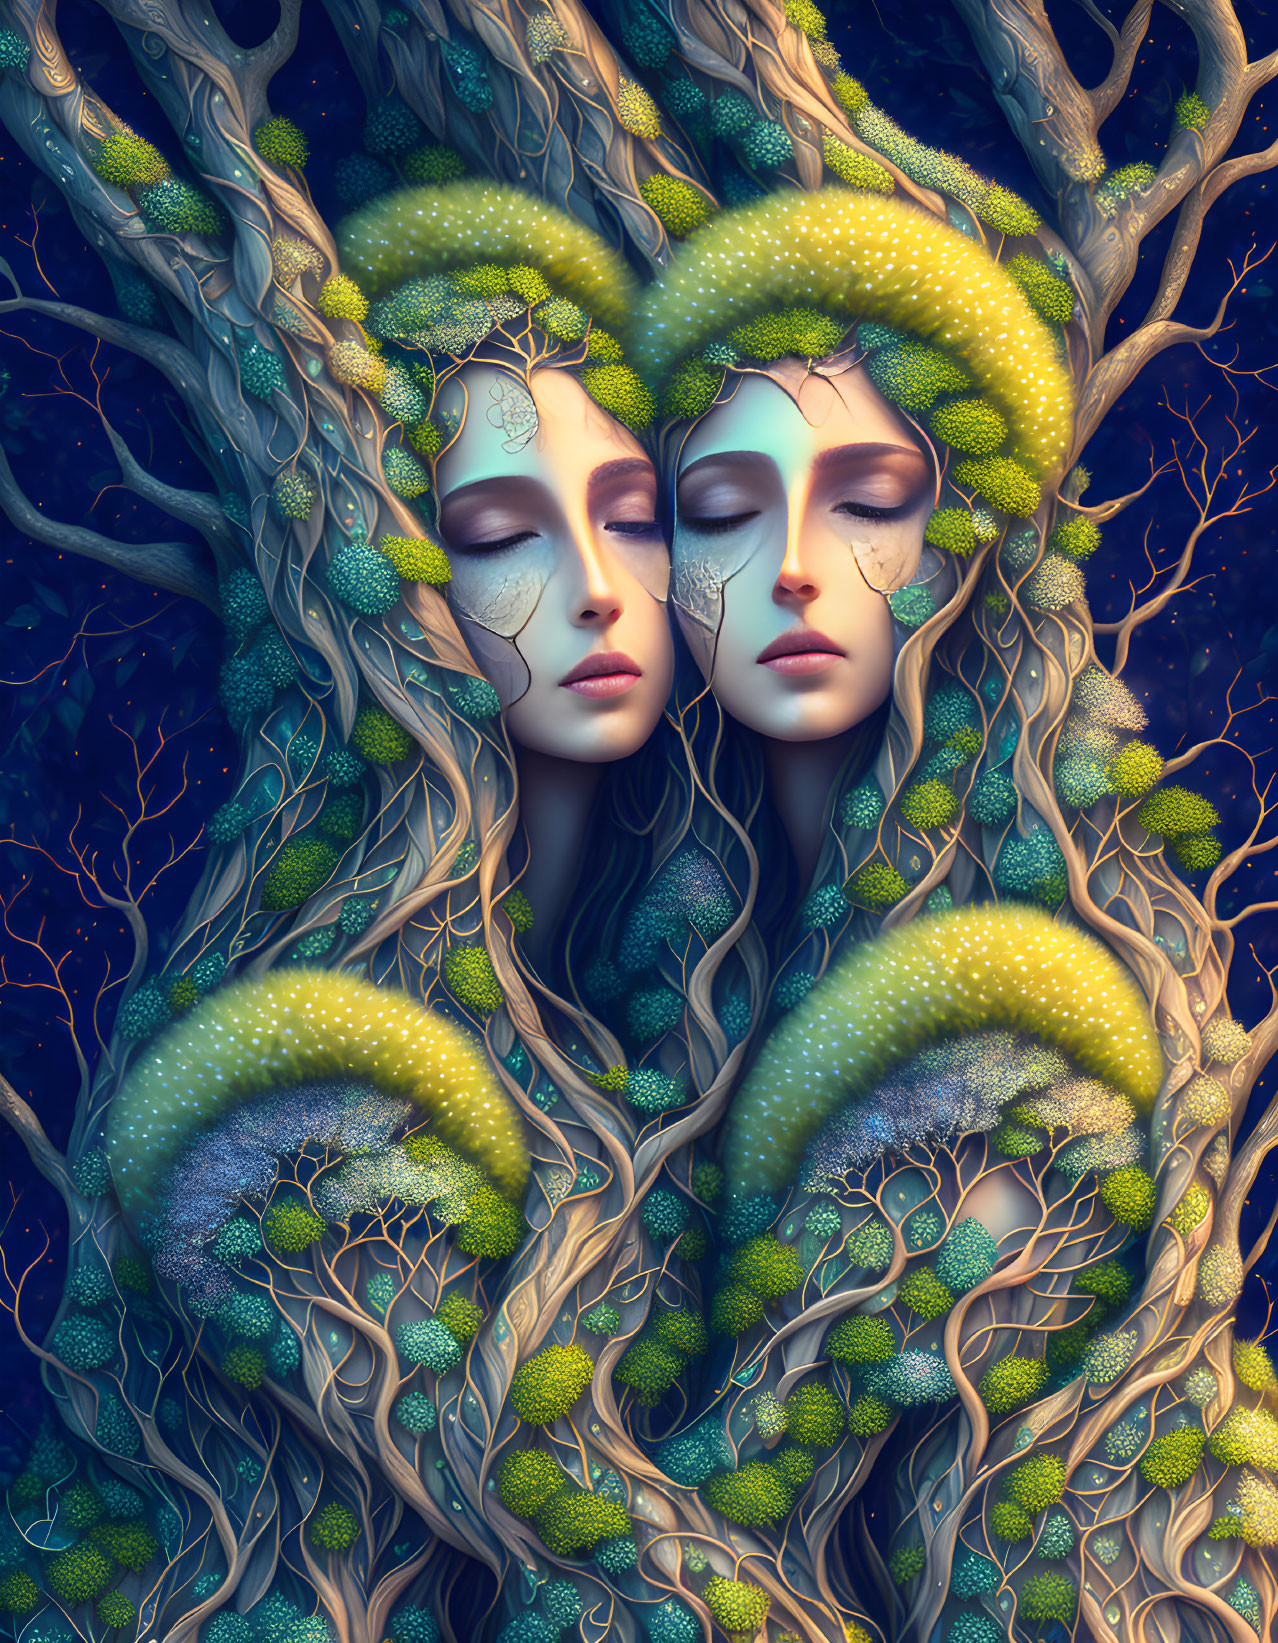 Ethereal figures embracing in mystical forest setting